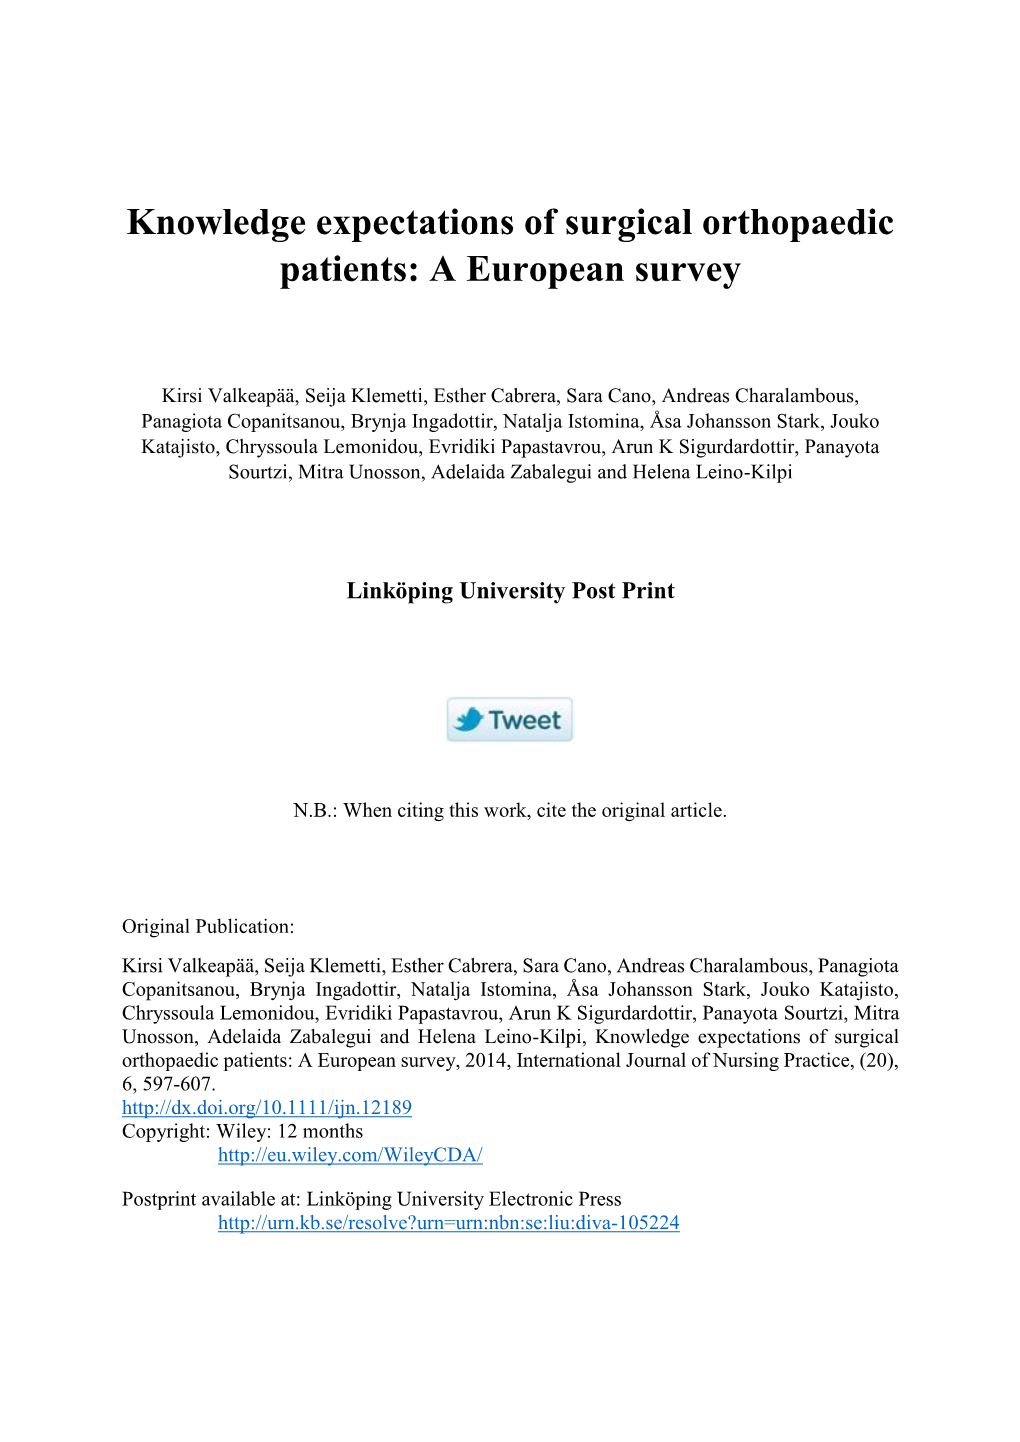 Knowledge Expectations of Surgical Orthopaedic Patients: a European Survey